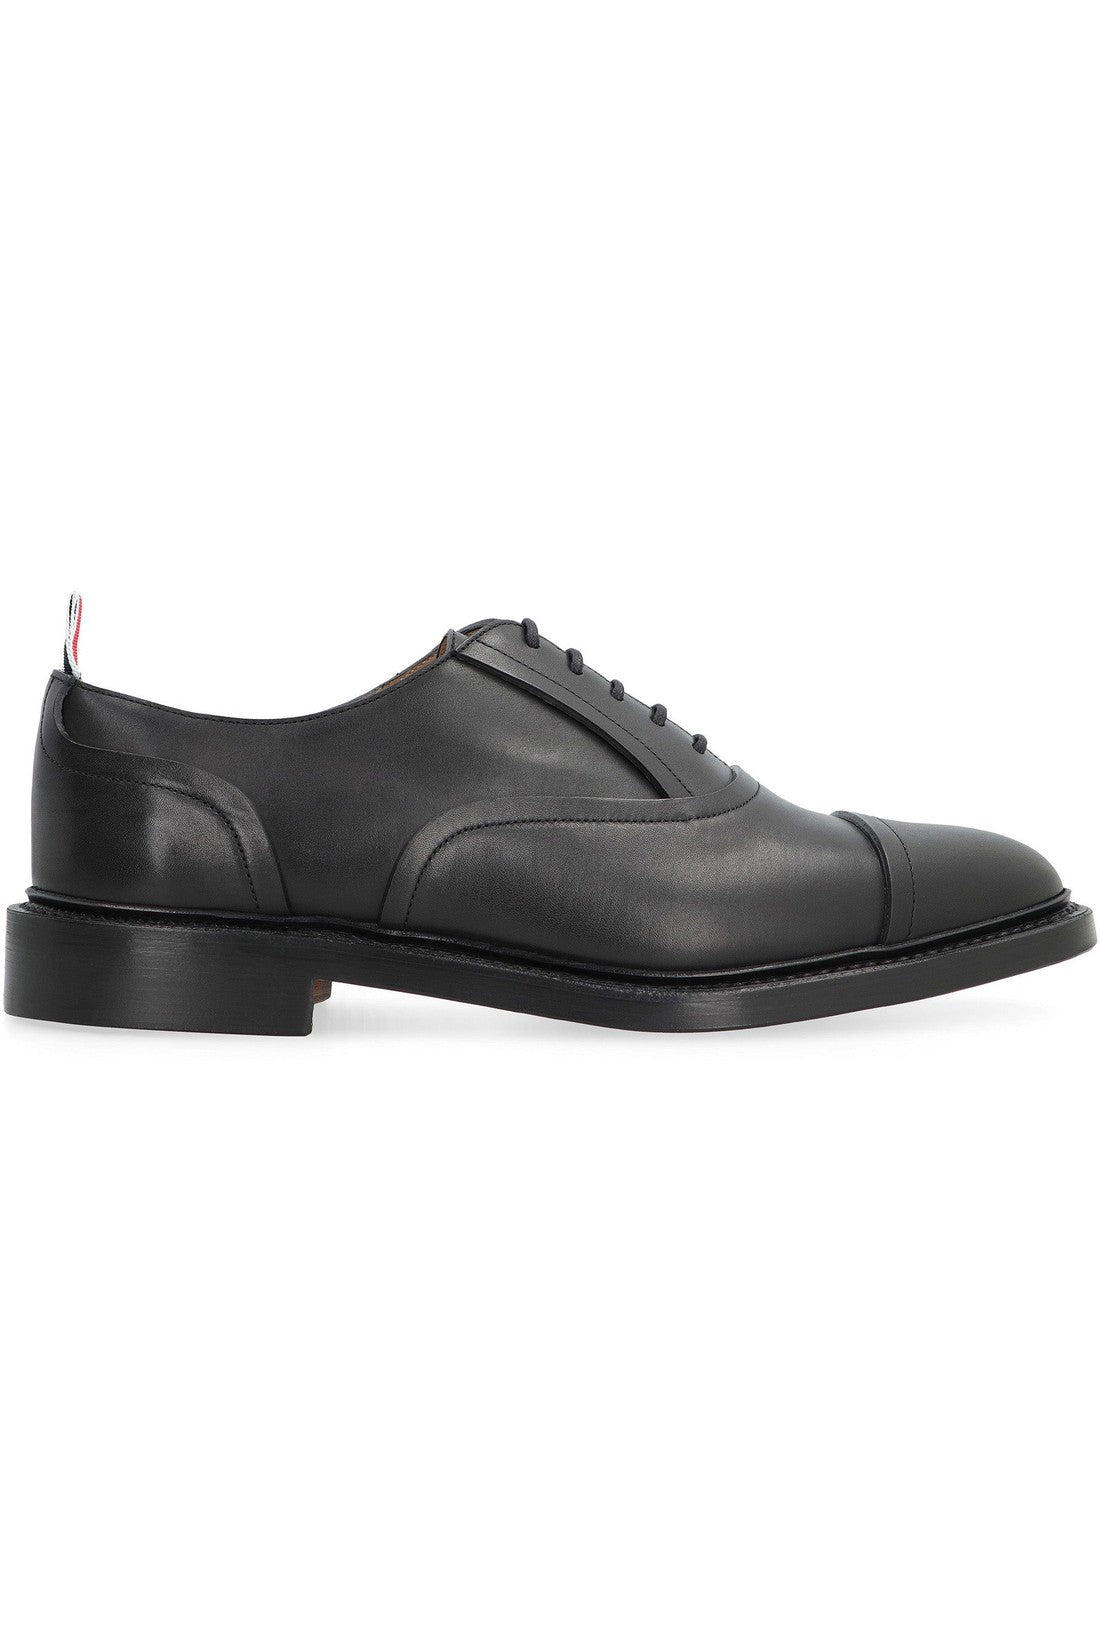 Thom Browne-OUTLET-SALE-Leather lace-up shoes-ARCHIVIST